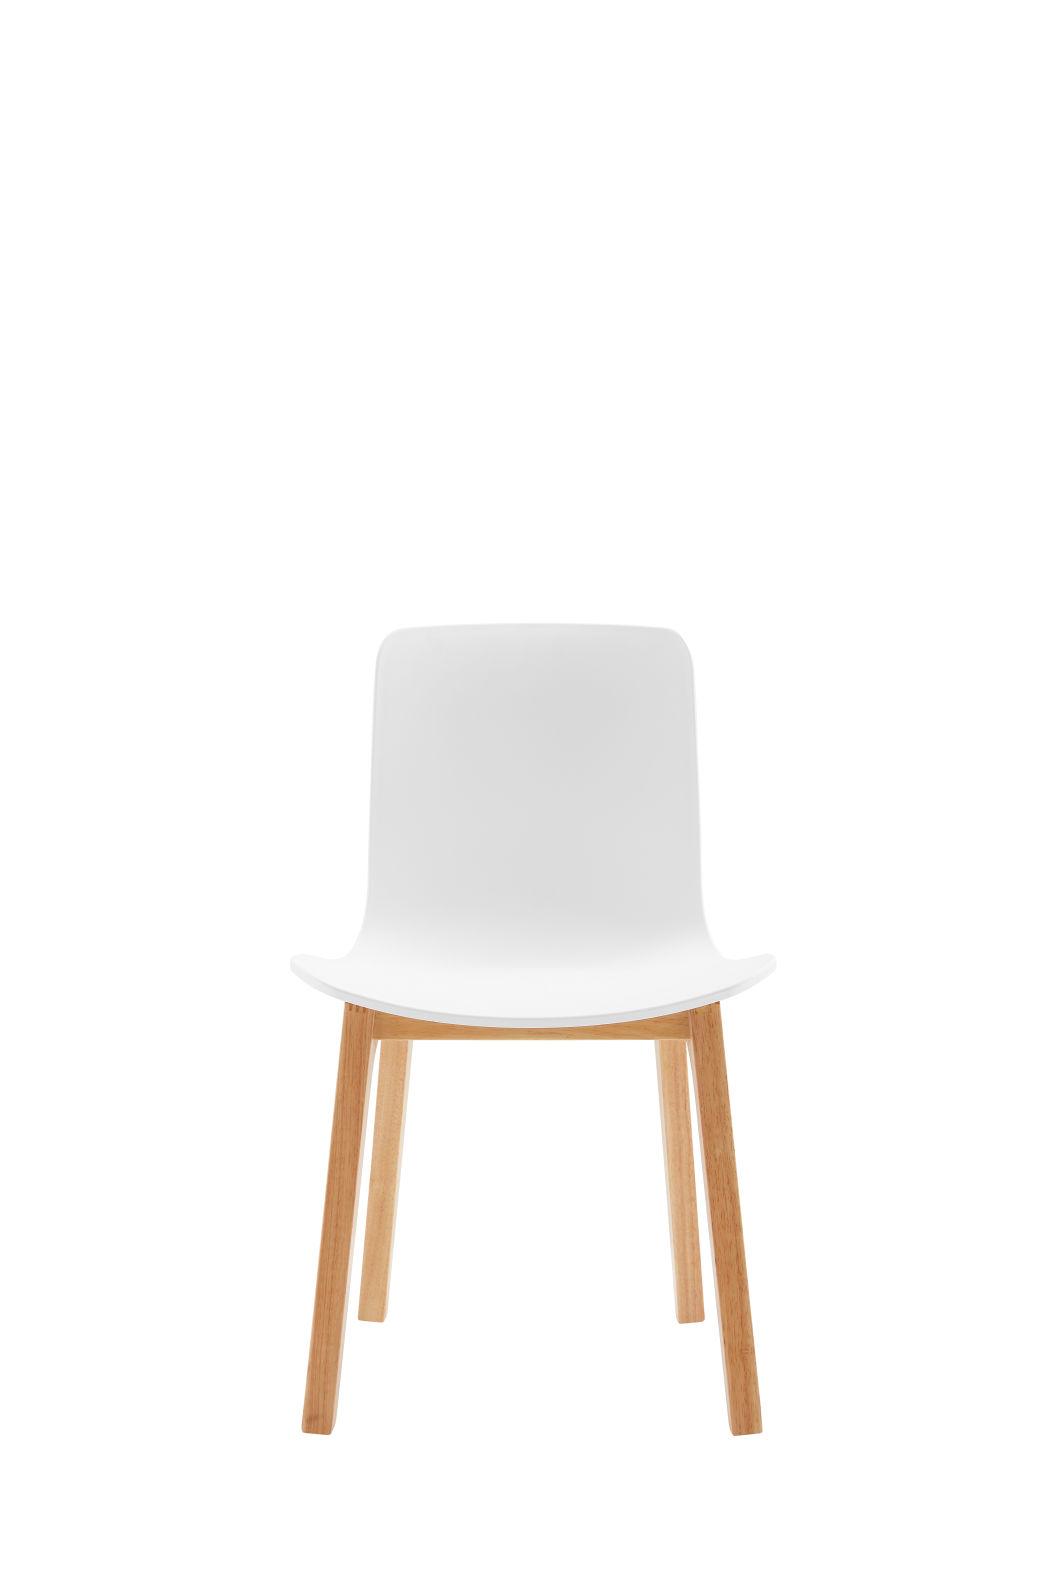 Modern Colored PP Chair Plastic Chair Beech Wood Legs Dining Chair